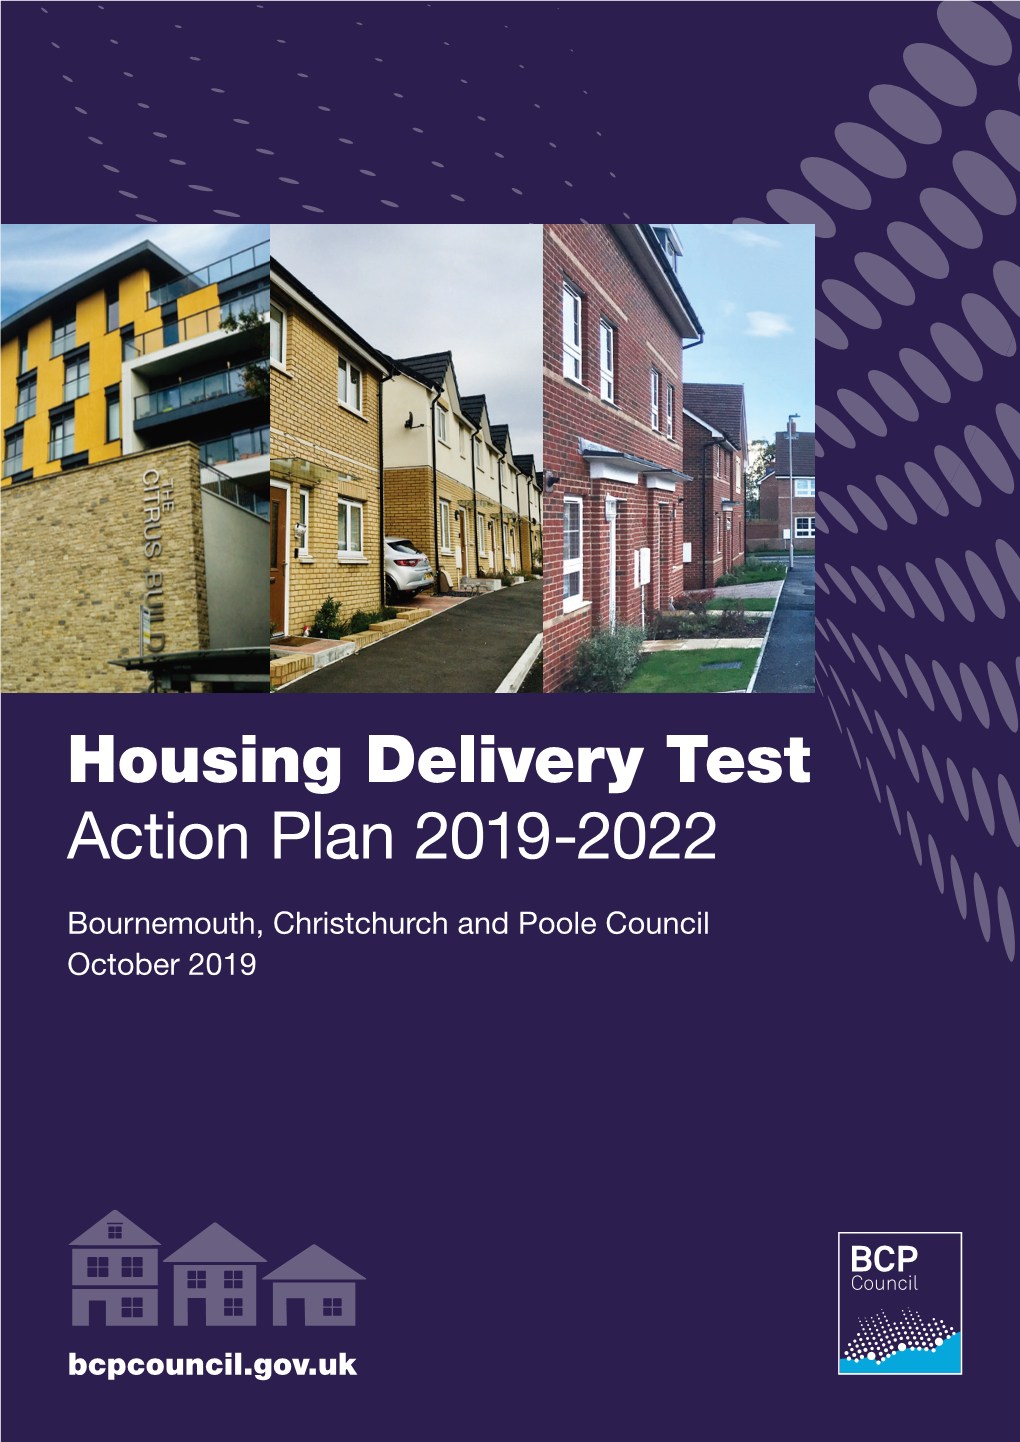 Housing Delivery Test Action Plan 2019-2022